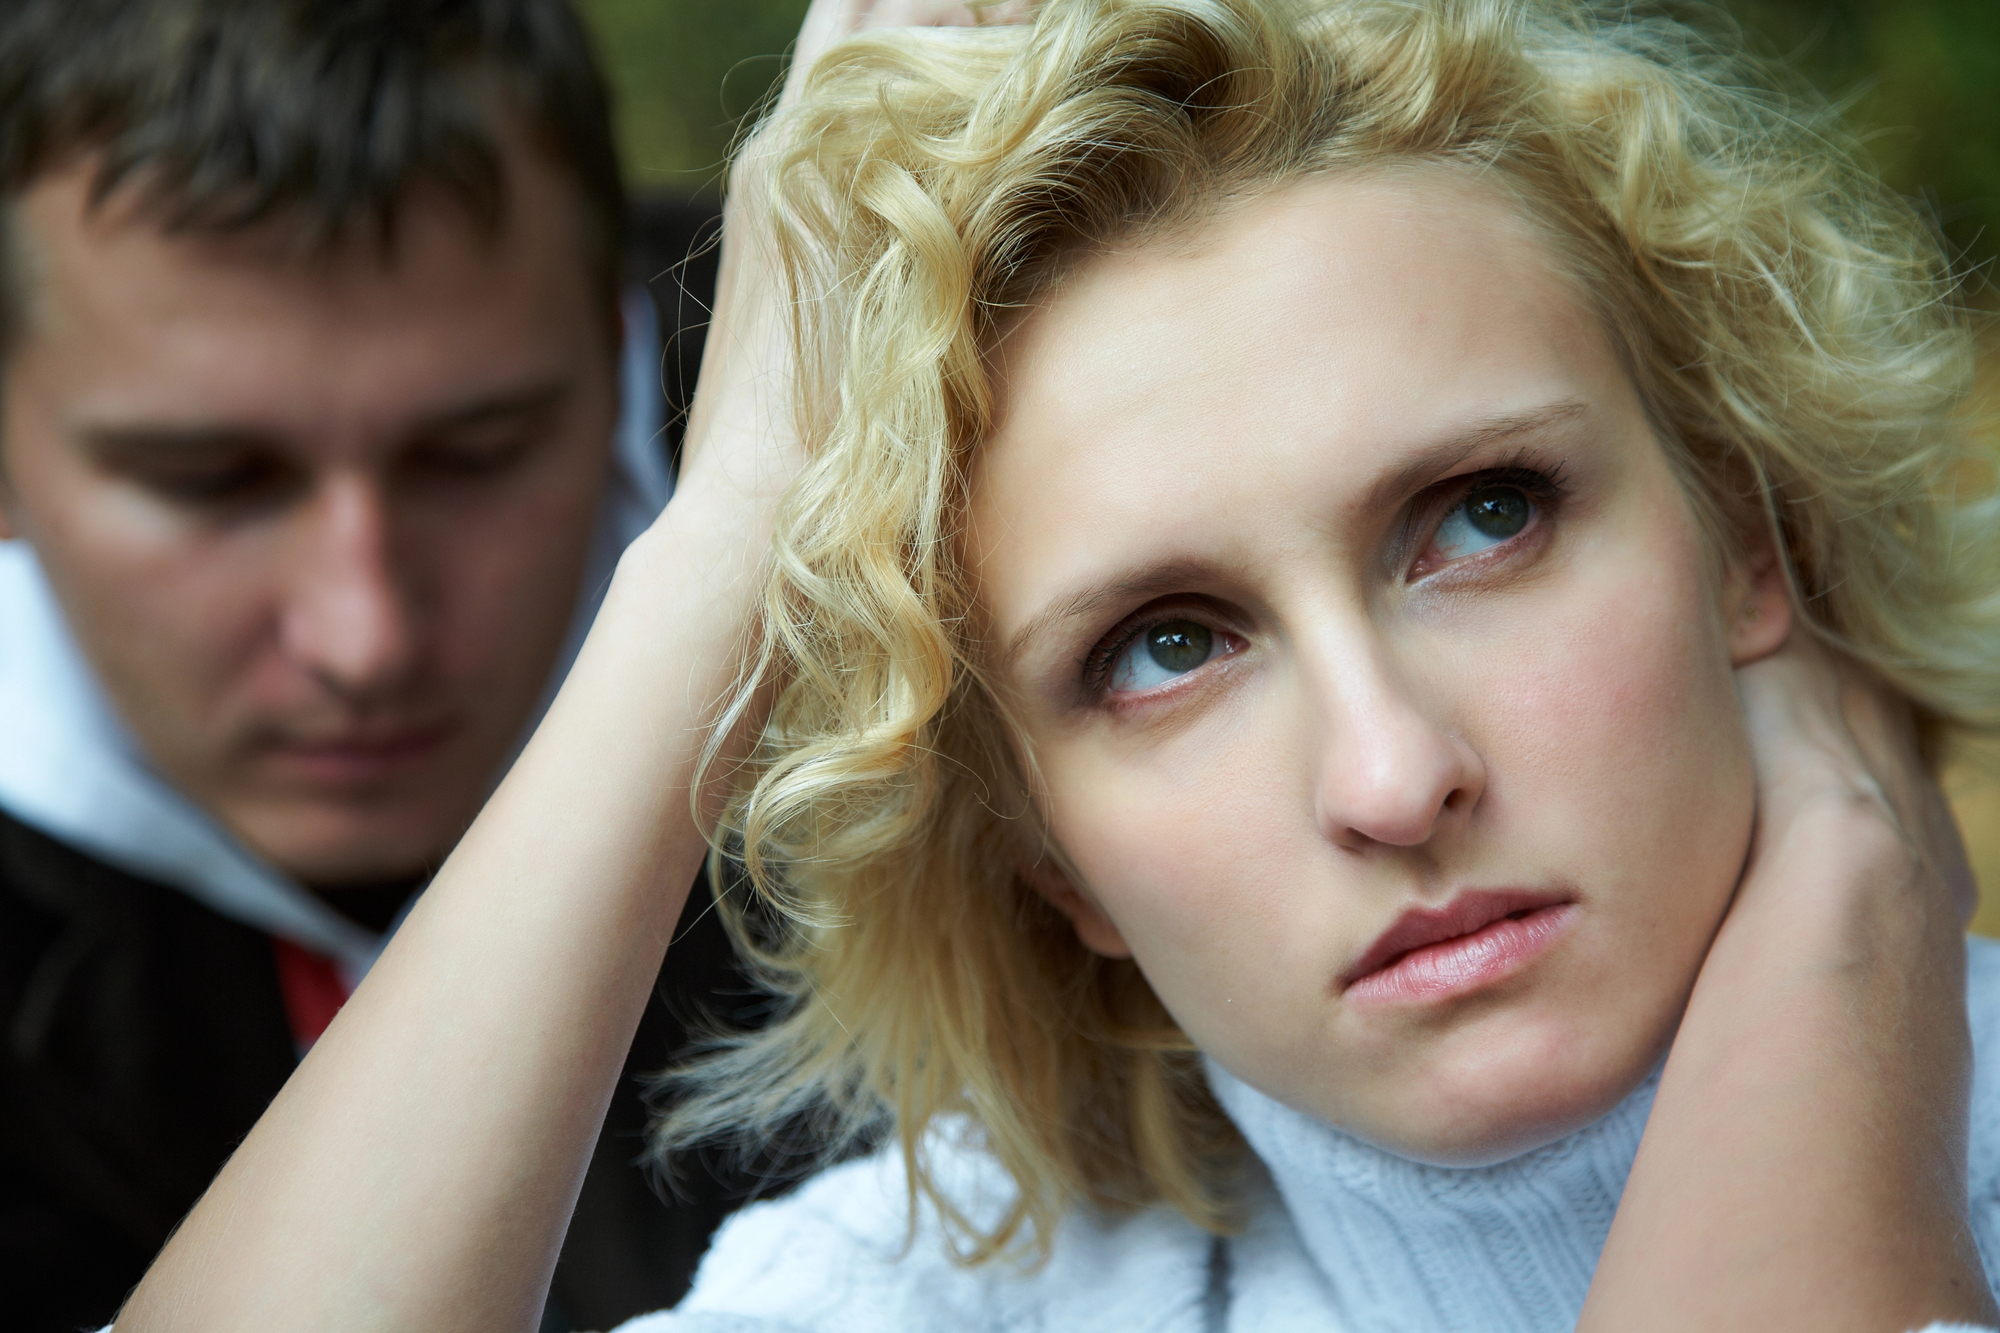 A blonde woman with curly hair looks pensive, gazing to the side with her hands touching her head. In the background, a man with short dark hair appears out of focus, his expression indistinct. The setting seems to be outdoors.